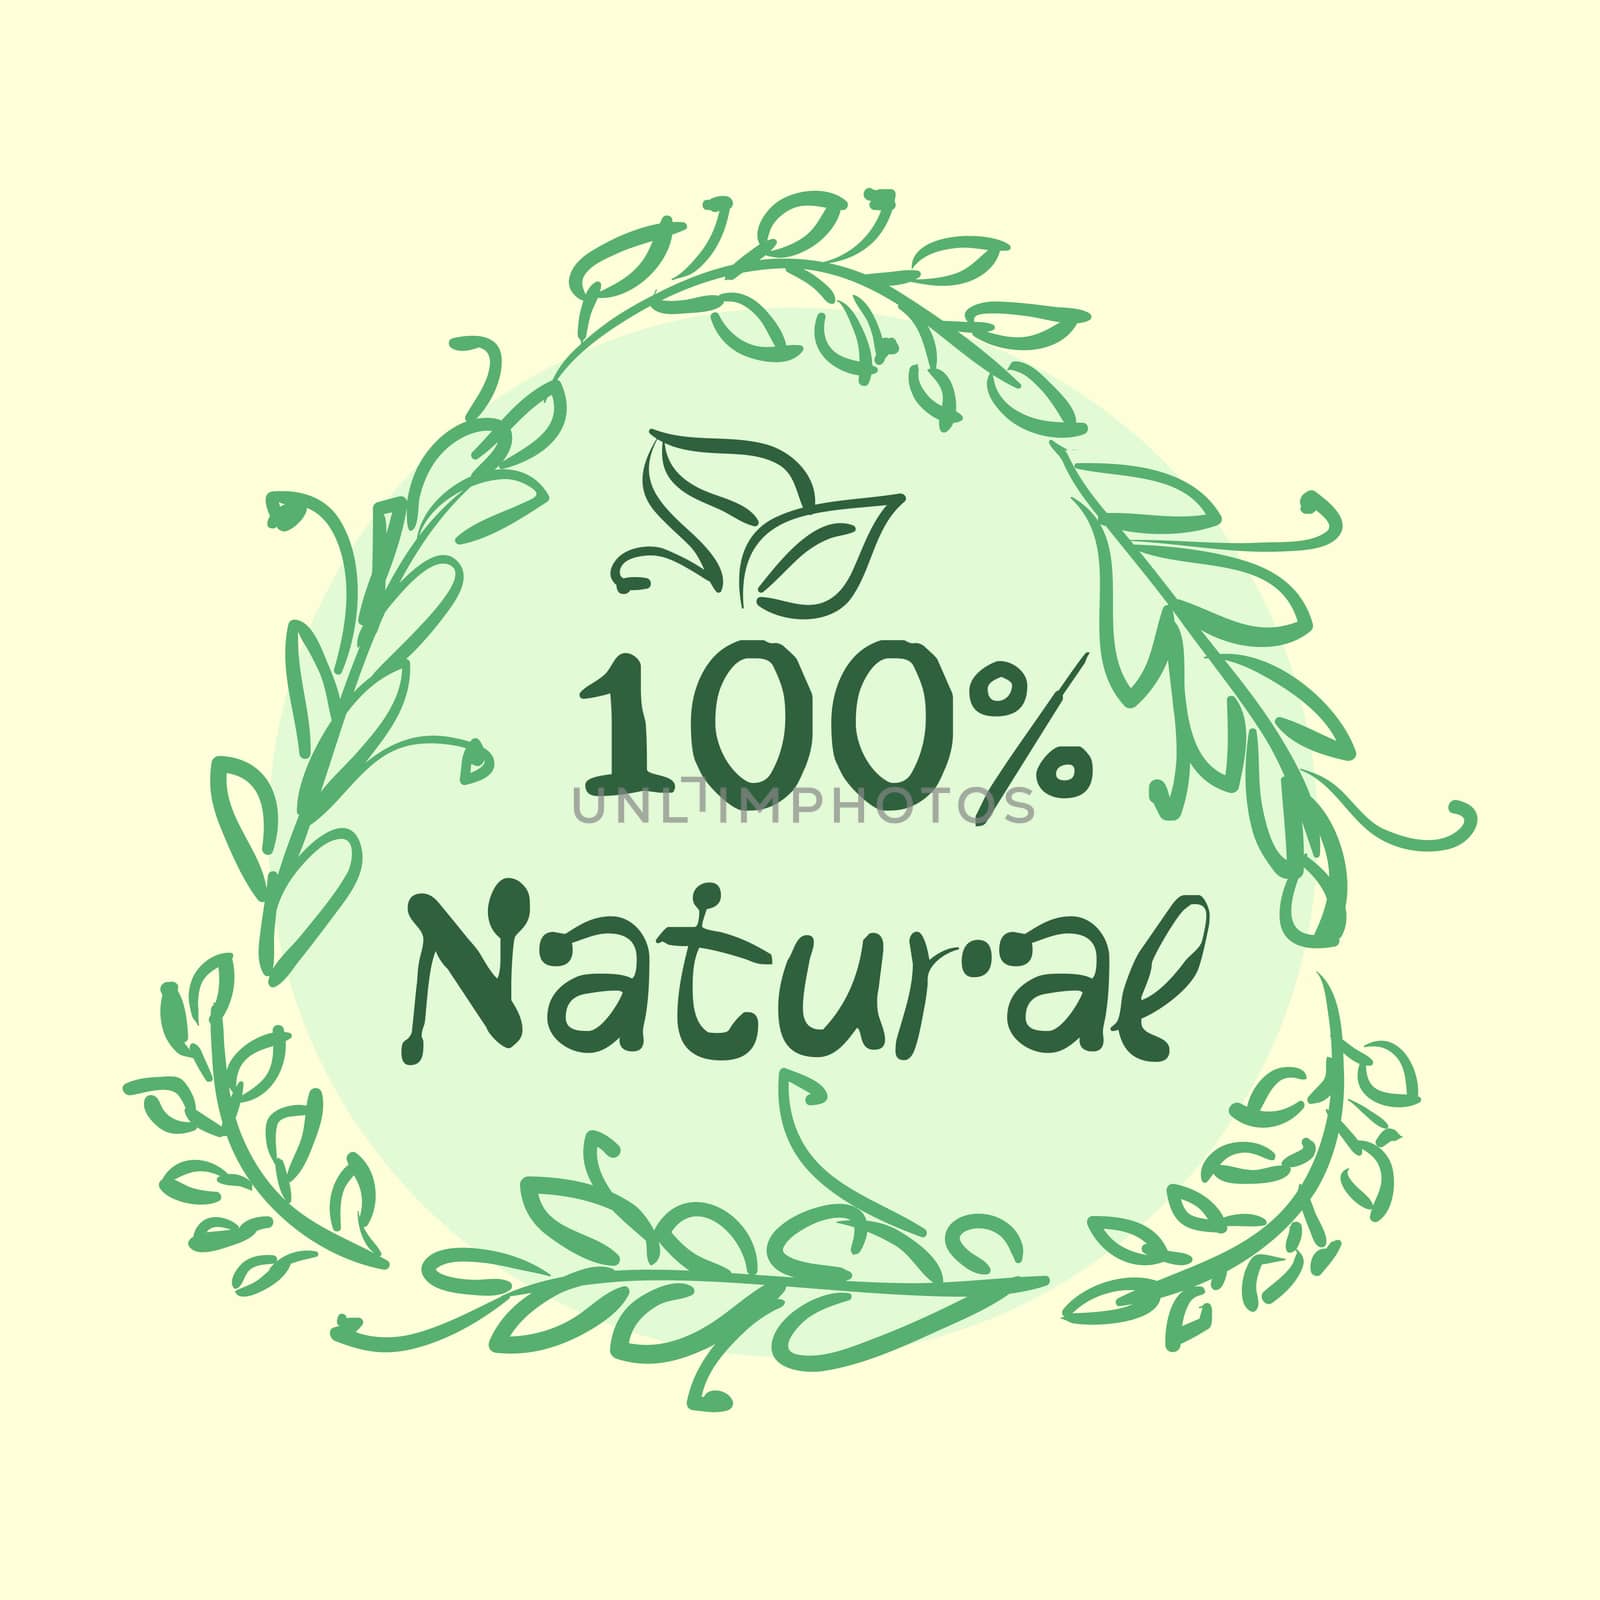 Flat label collection of 100 organic product and premium quality natural food badge elements. Isolated on white background. Flat design style modern concept. illustration